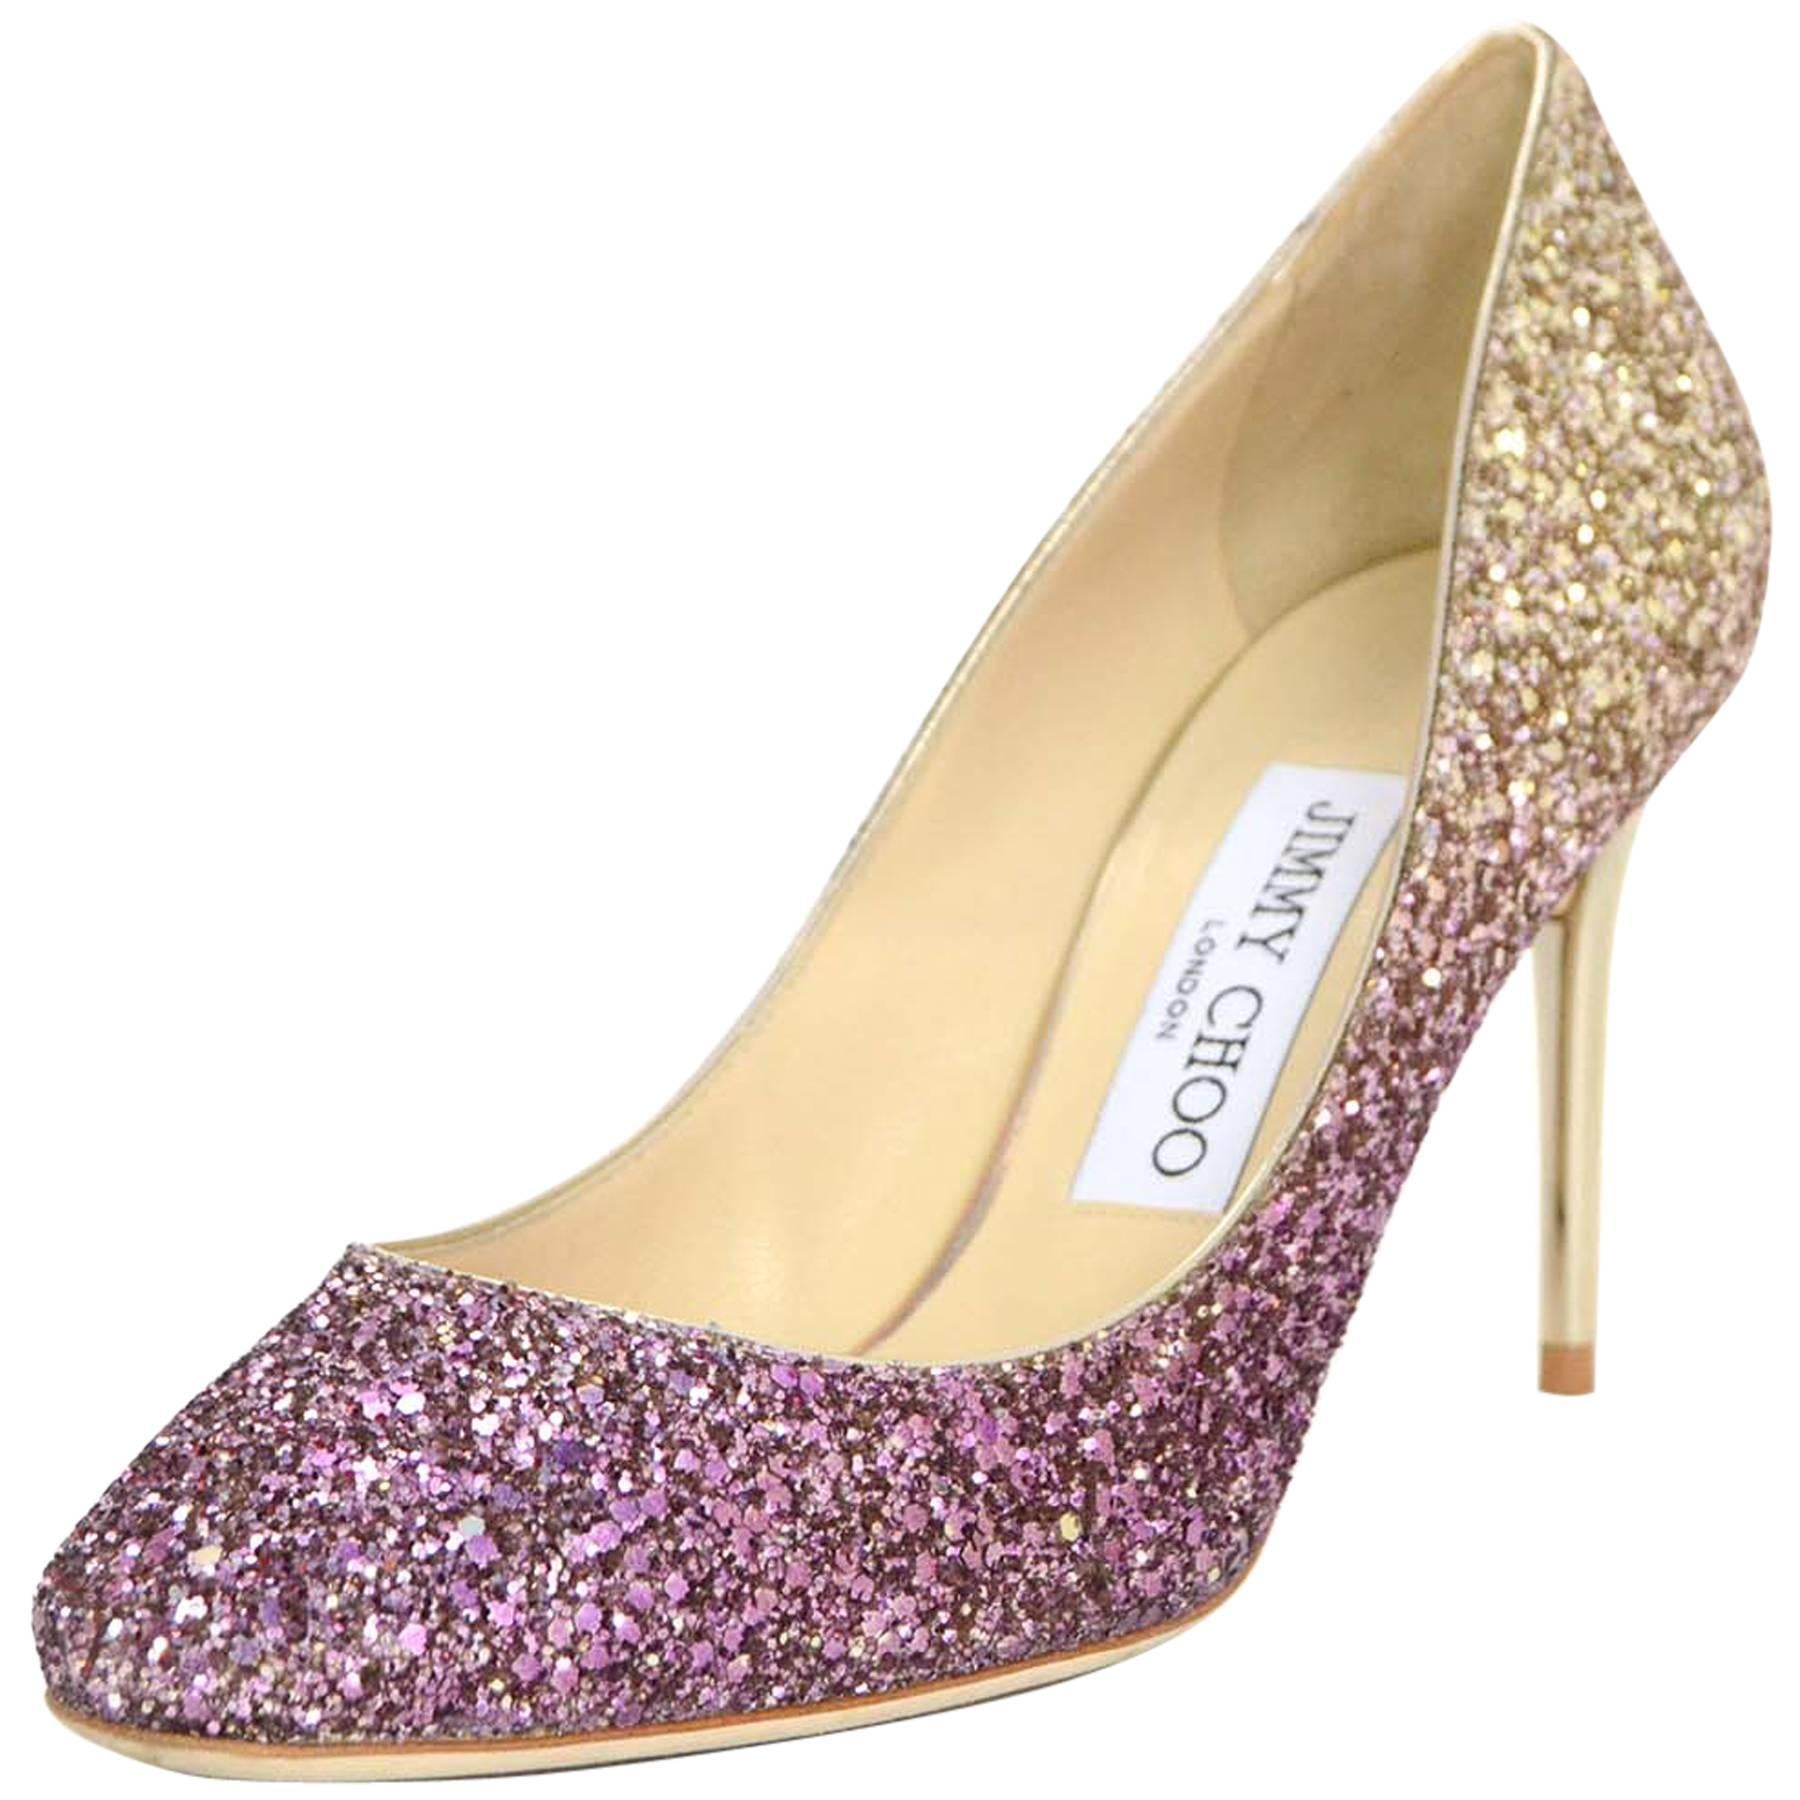 Jimmy Choo Esme Gold and Pink Ombre Glitter Pumps Sz 36